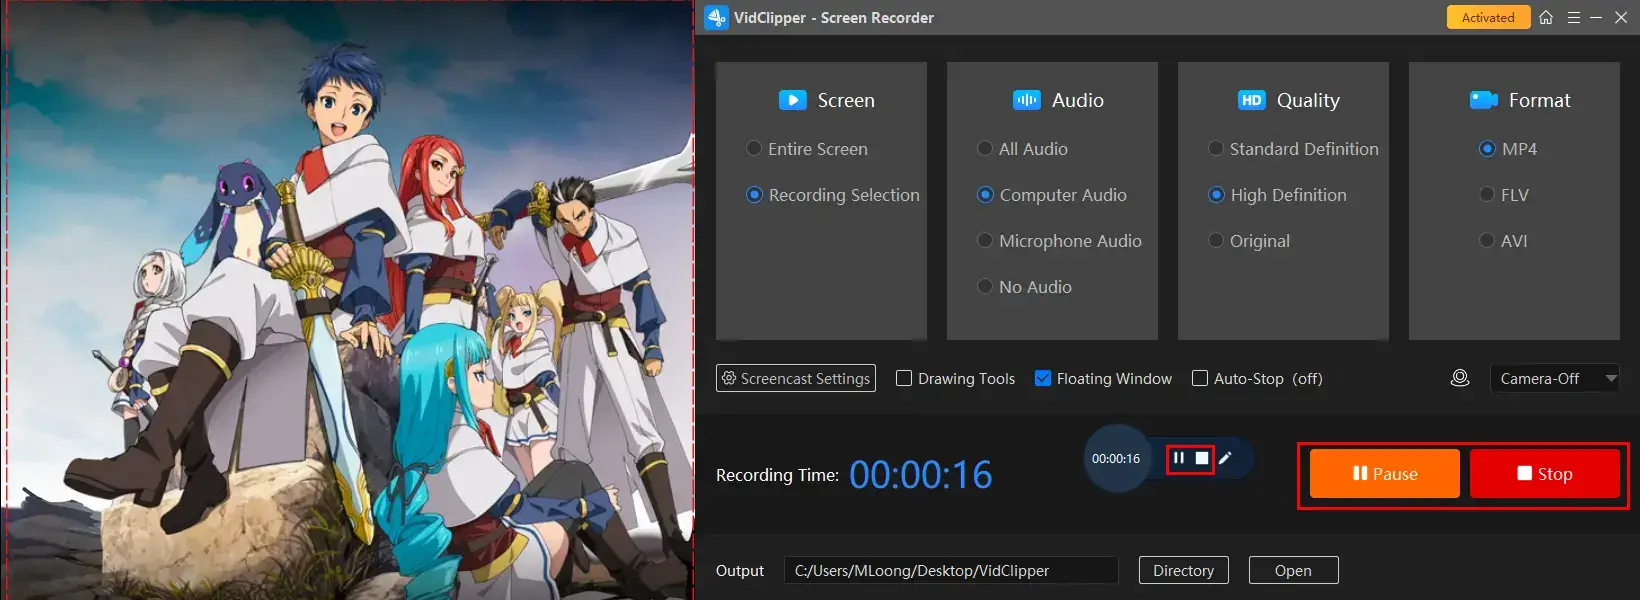 how to screen record crunchyroll on windows using workintool capture screen recorder